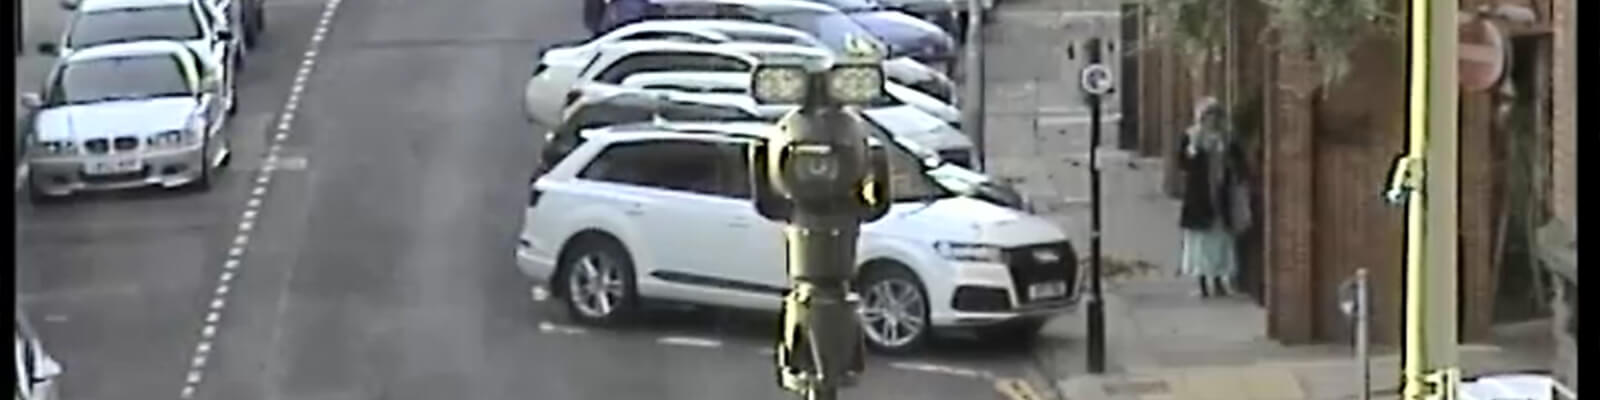 A still from a CCTV camera showing another CCTV camera